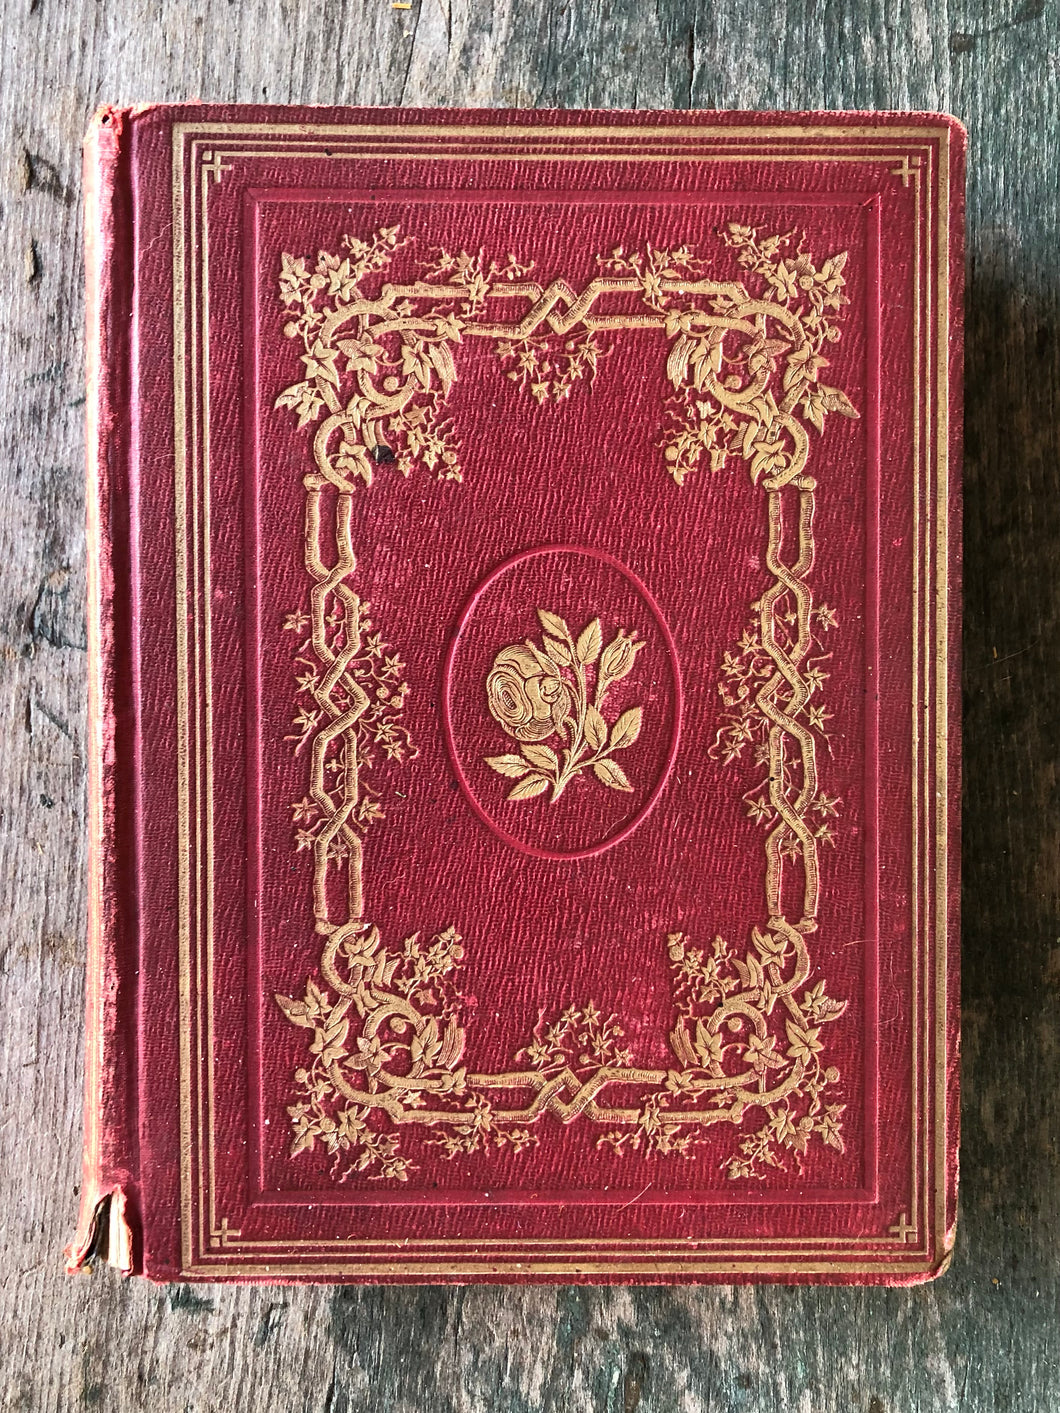 The Evening Book: Or, Fireside Talk on Morals and Manners, with Sketches of Western Life by Mrs. Kirkland